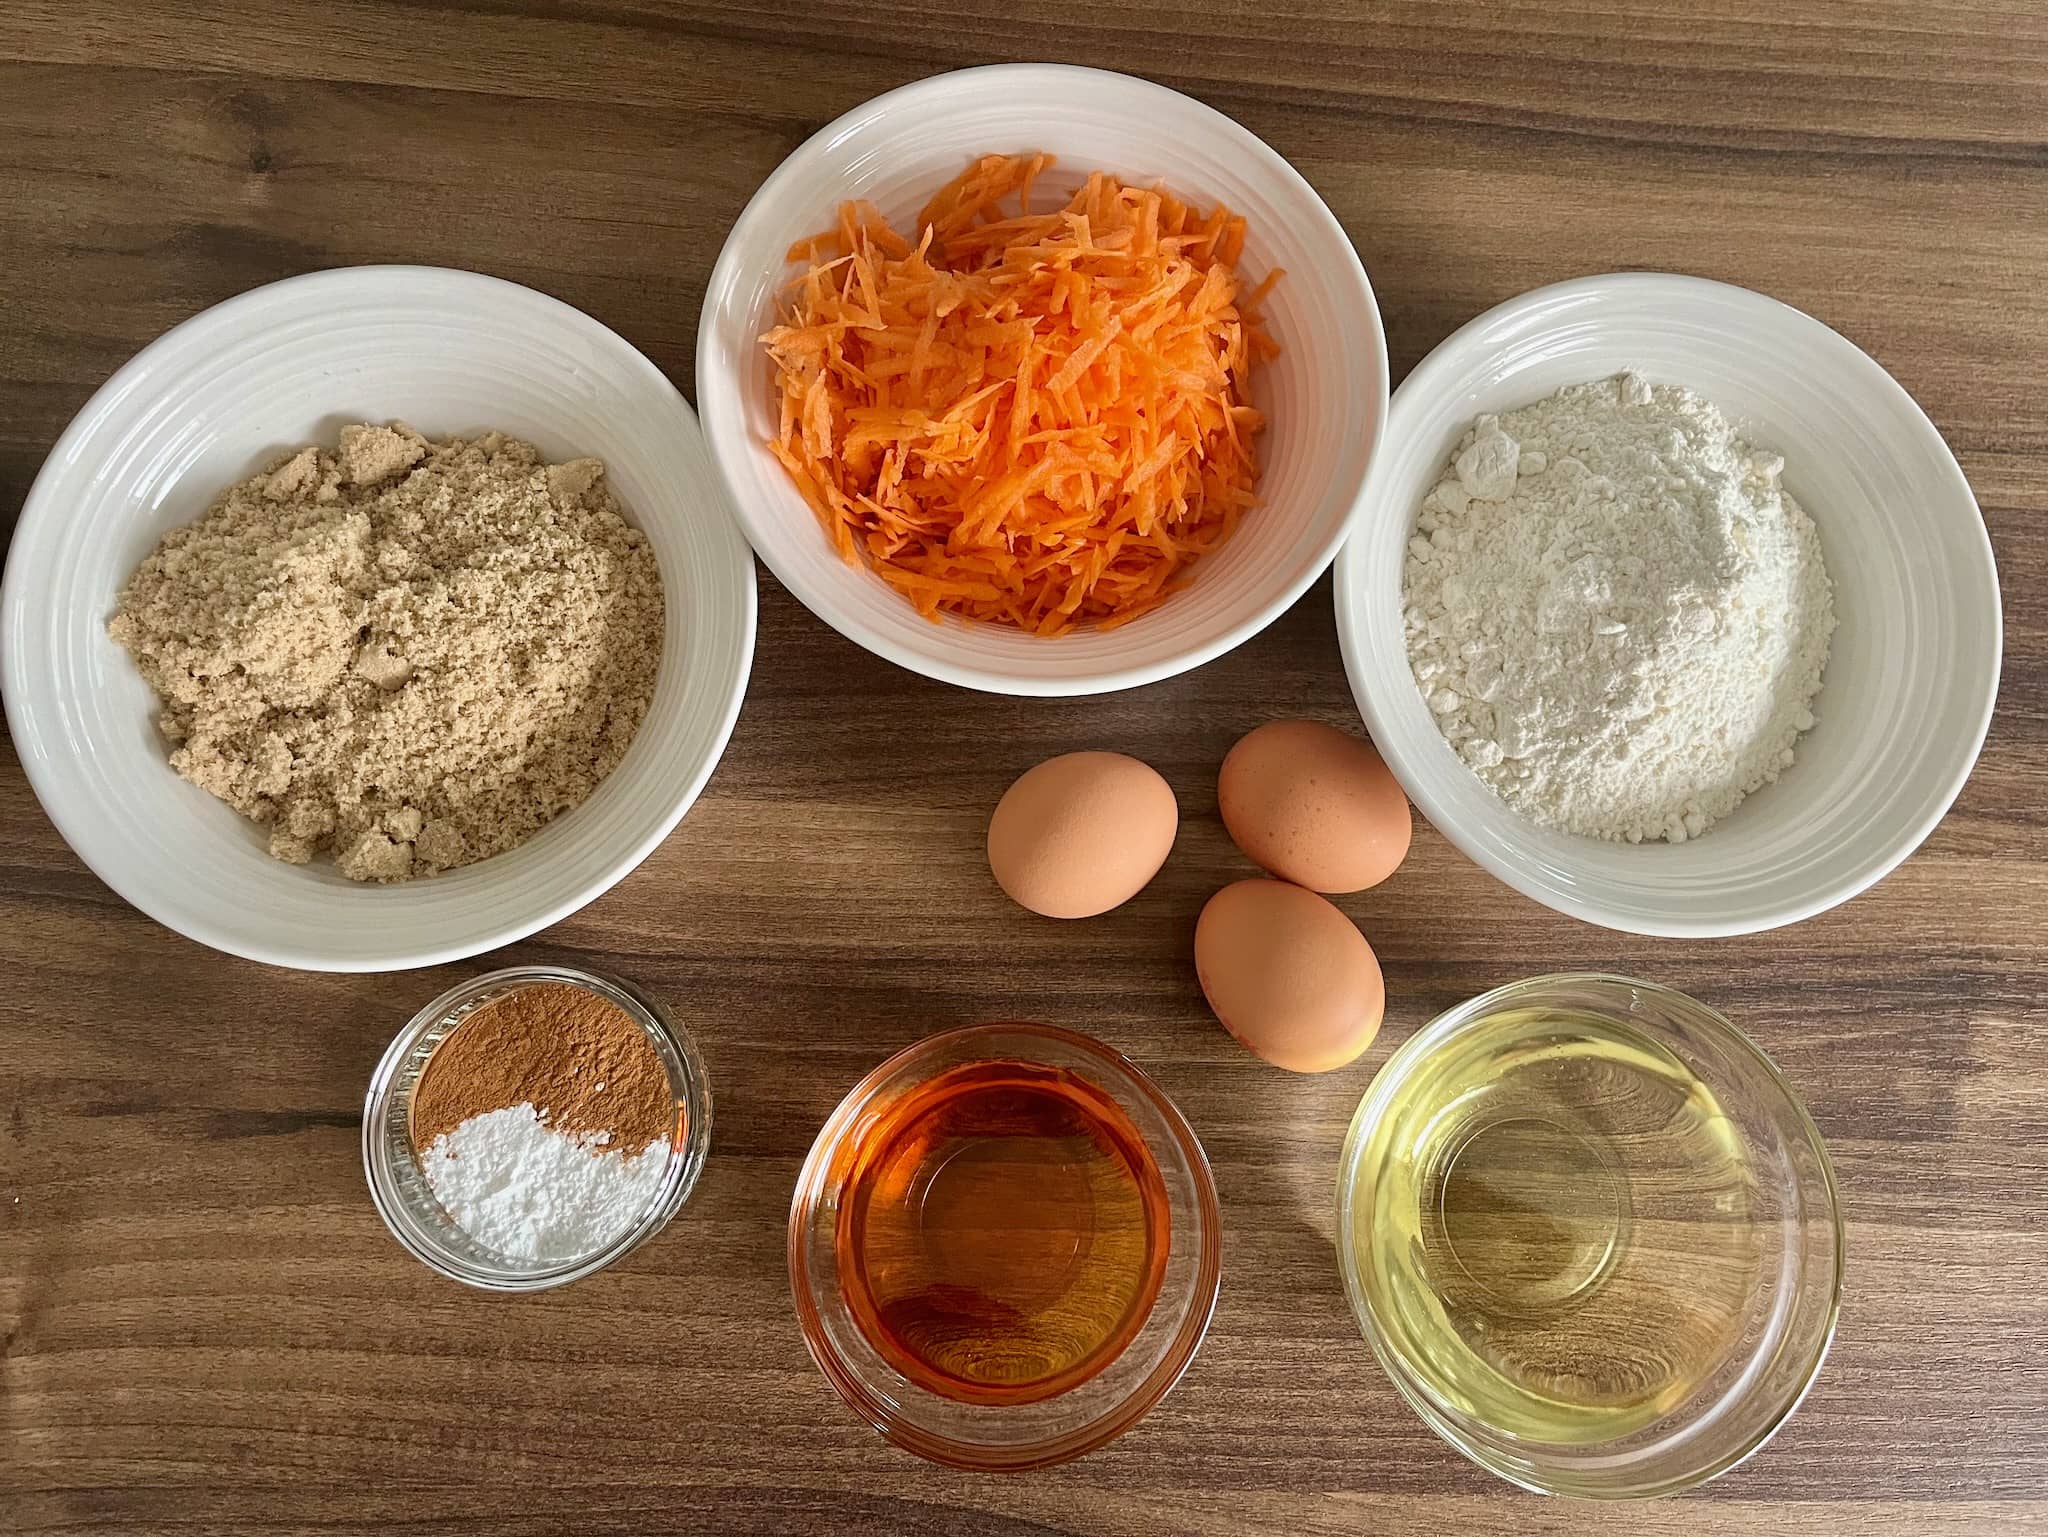 All the ingredients are on the table, ready to make carrot cake